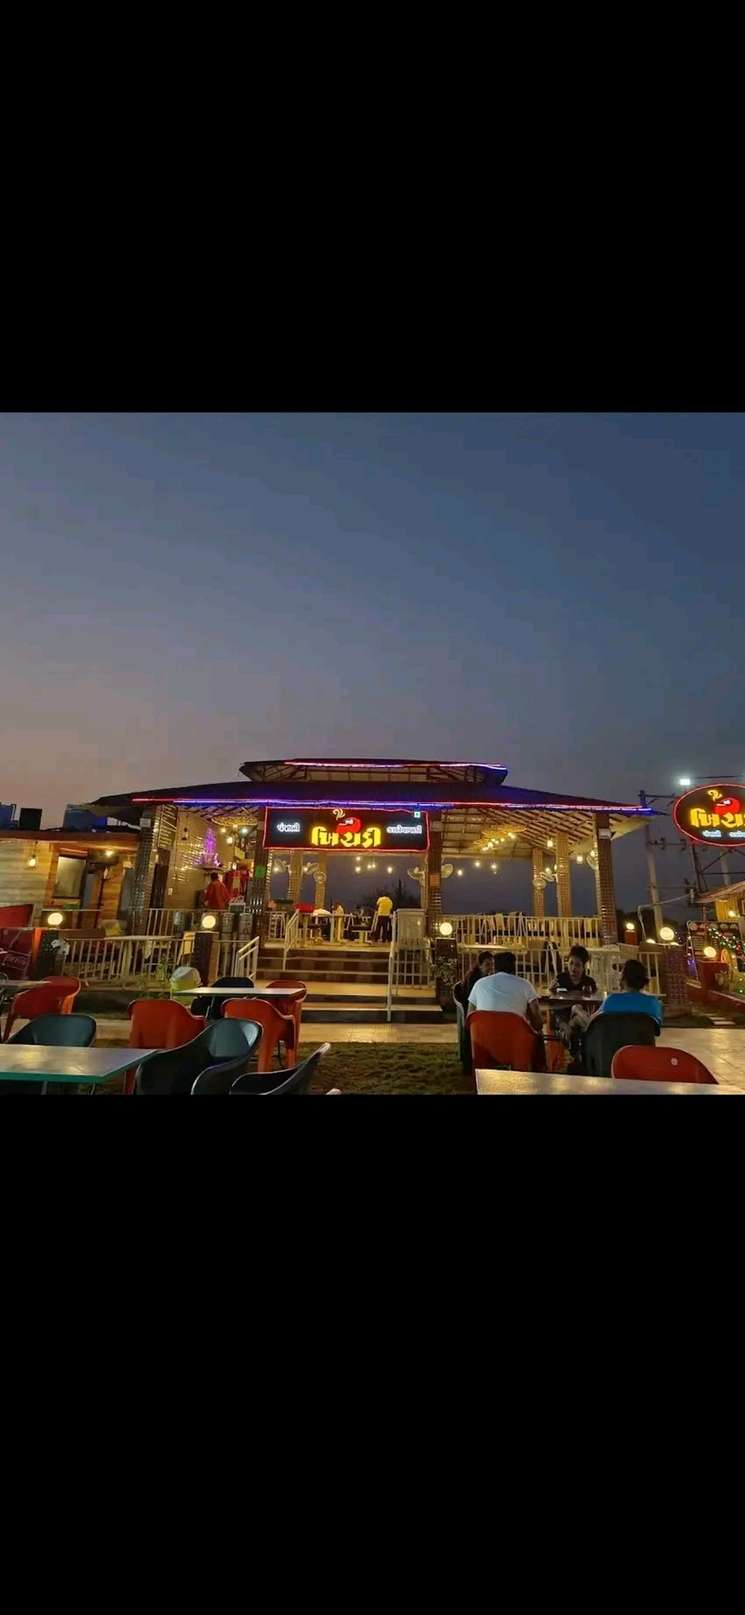 Pre Lease Highway Touch Restaurant For Sale On Ahmedabad Indore Gujarat With A Rental Income Of 90 Thousand Per Month.Area: 3500 Sq Ftprice: 1.30 Crore